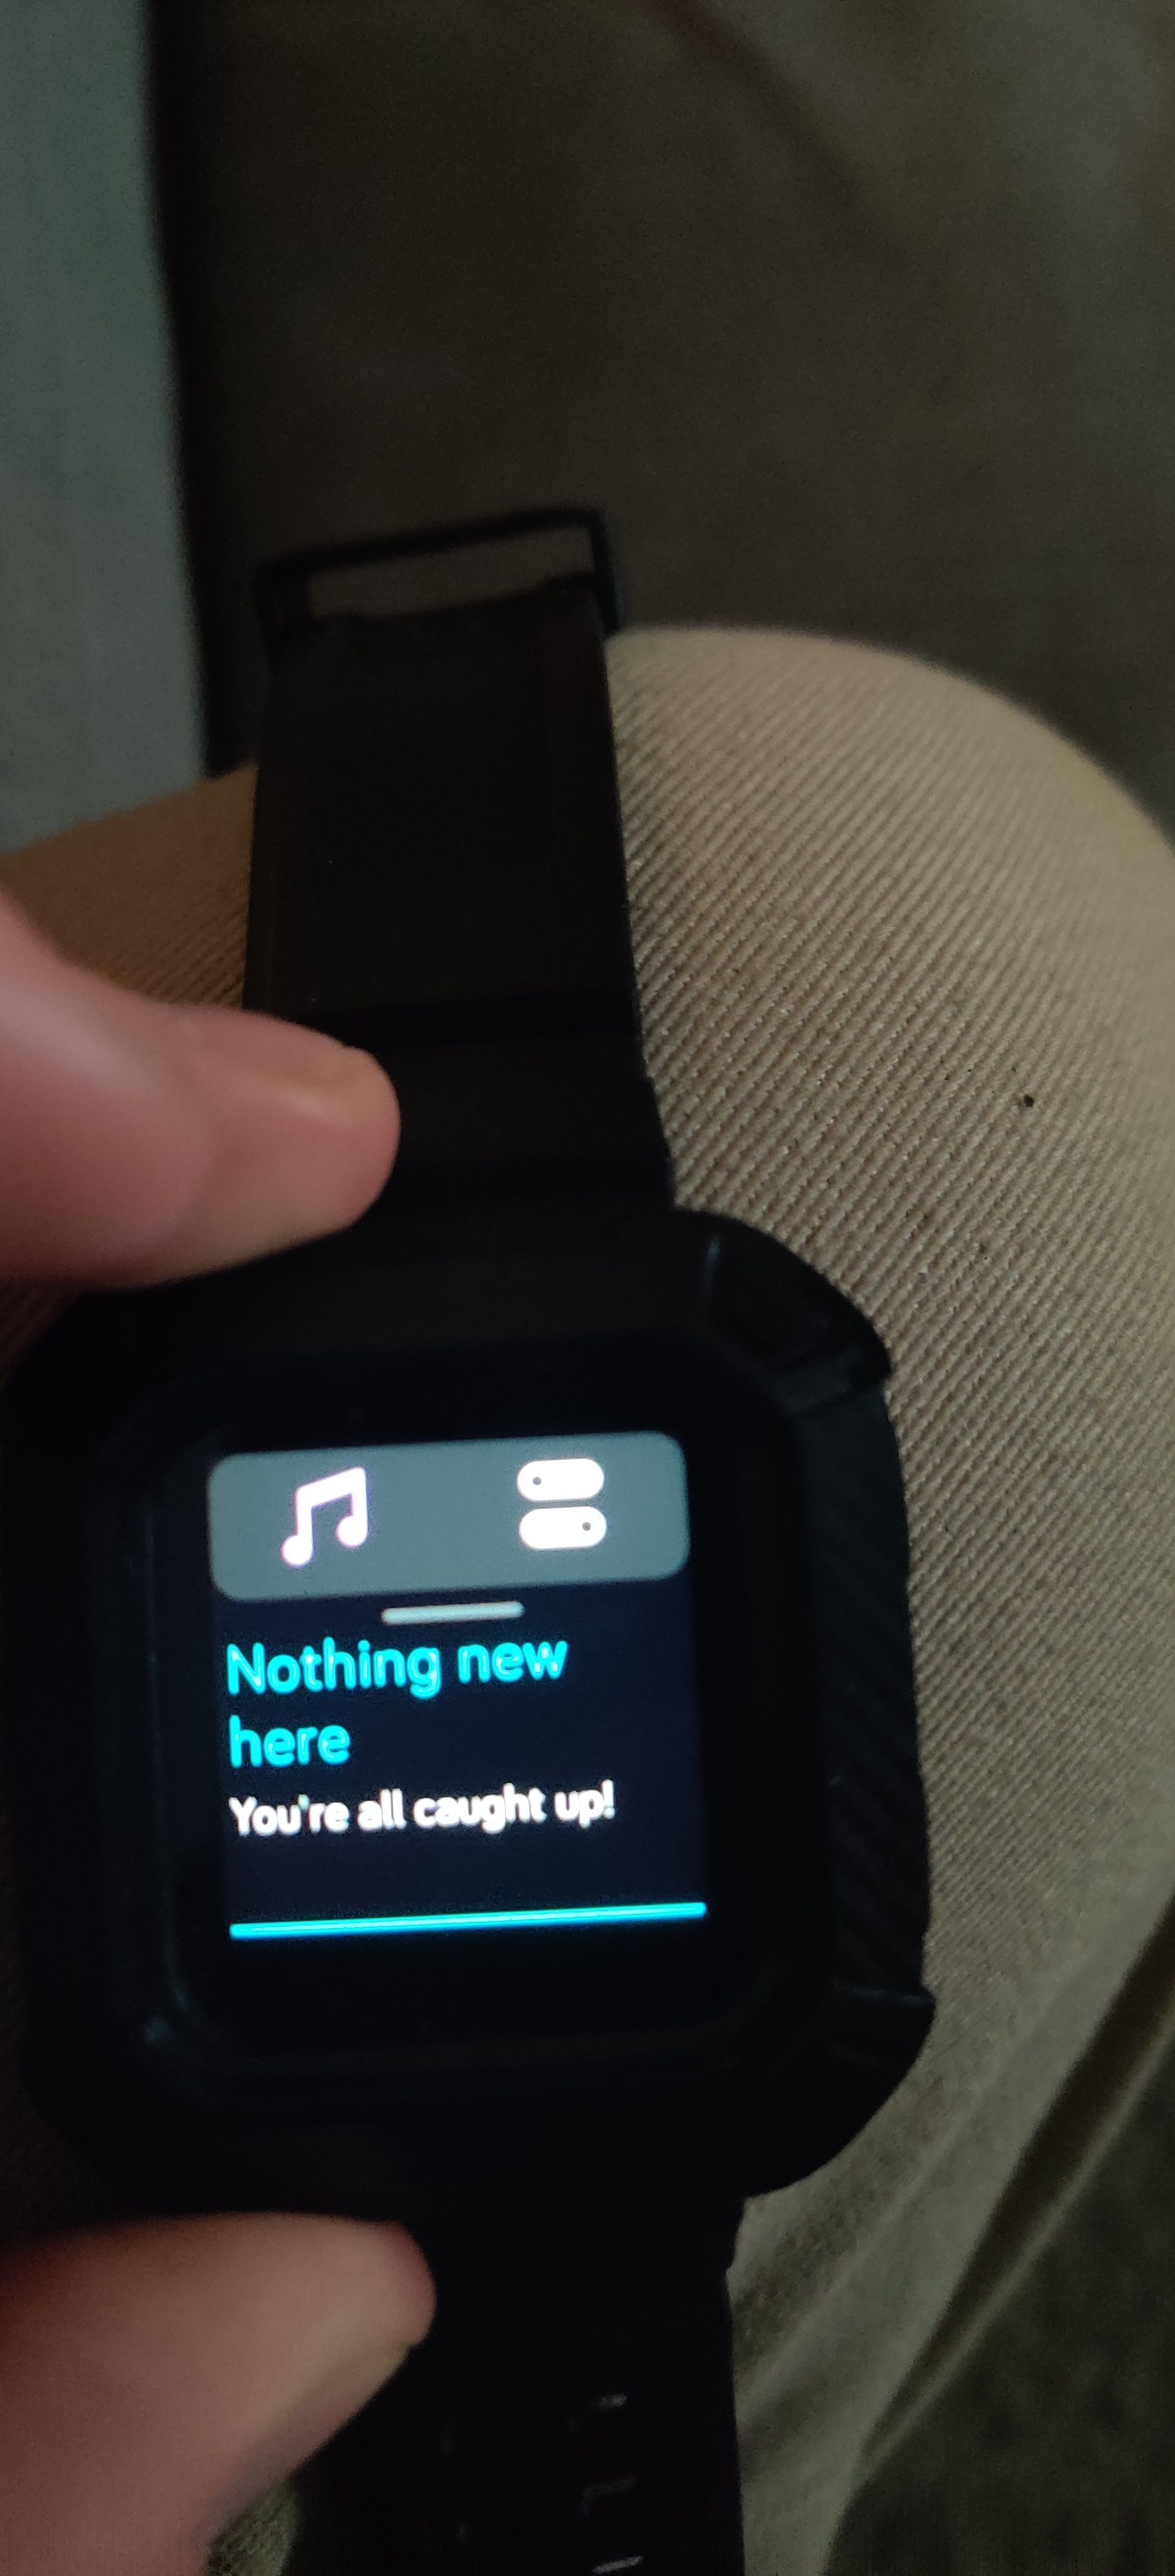 Solved: Fitbit OS 4.0.1 - Firmware 